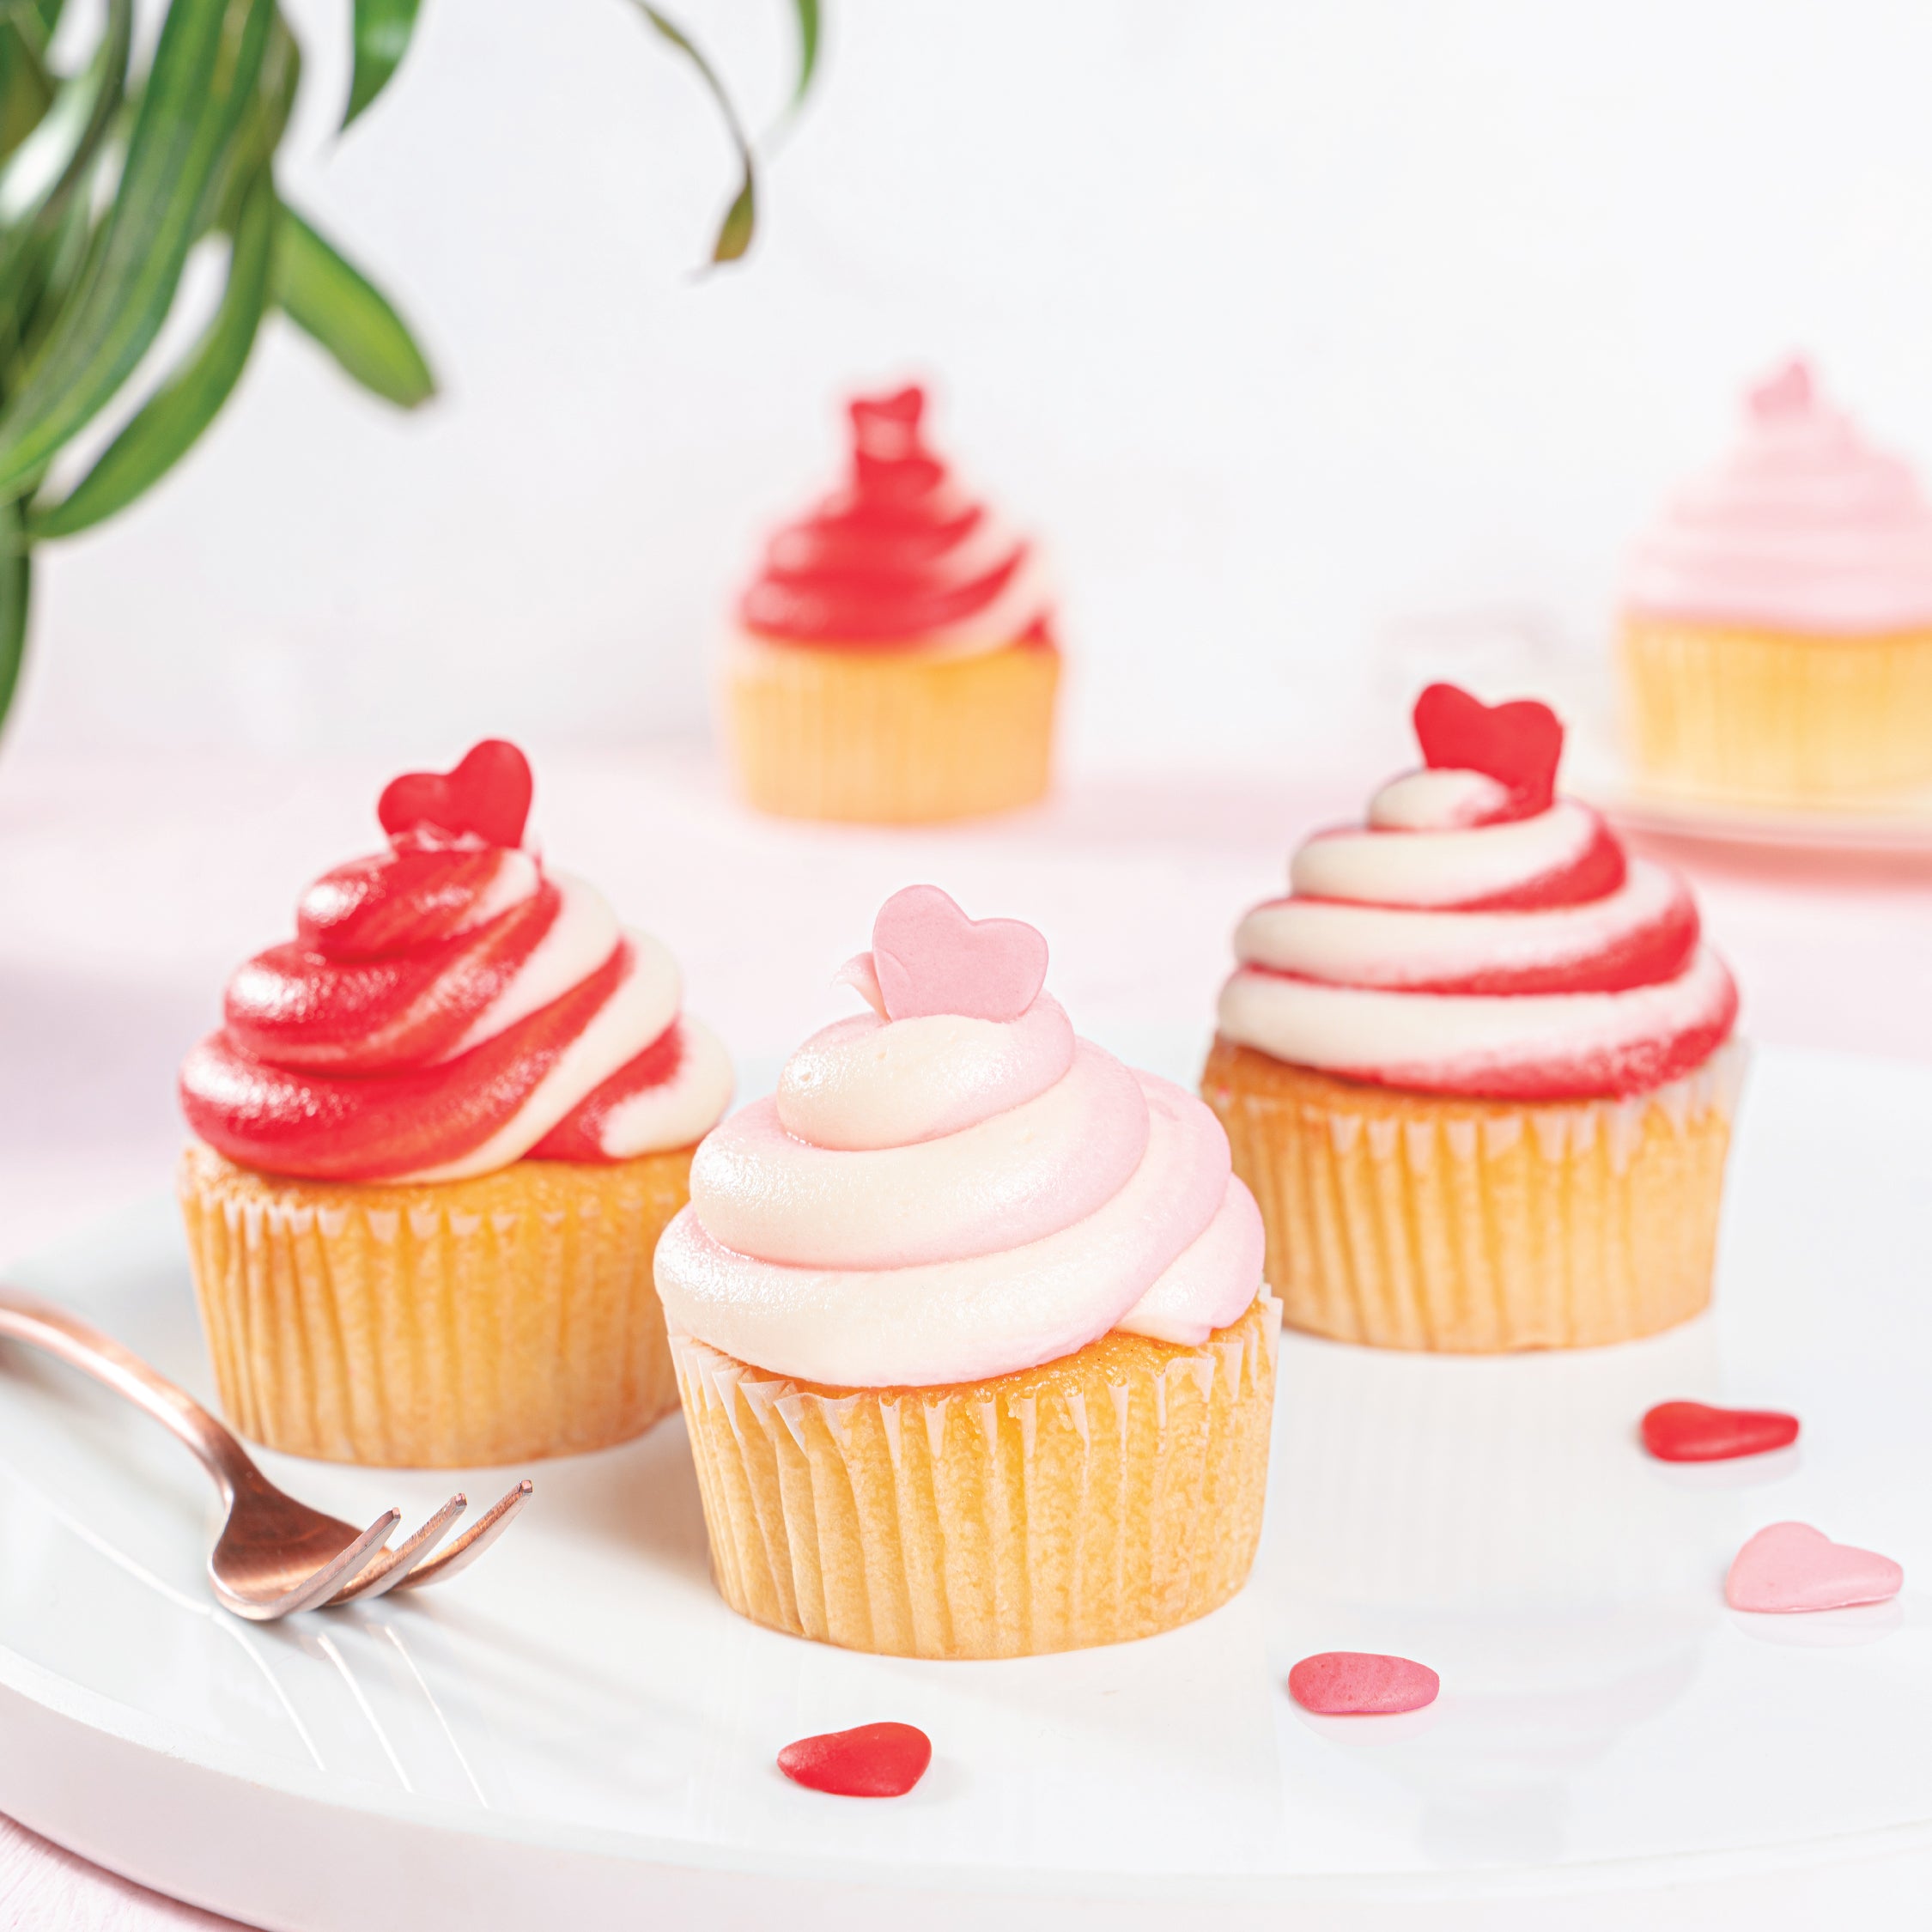 Vday Cupcakes (Box of 6) - KHI ONLY